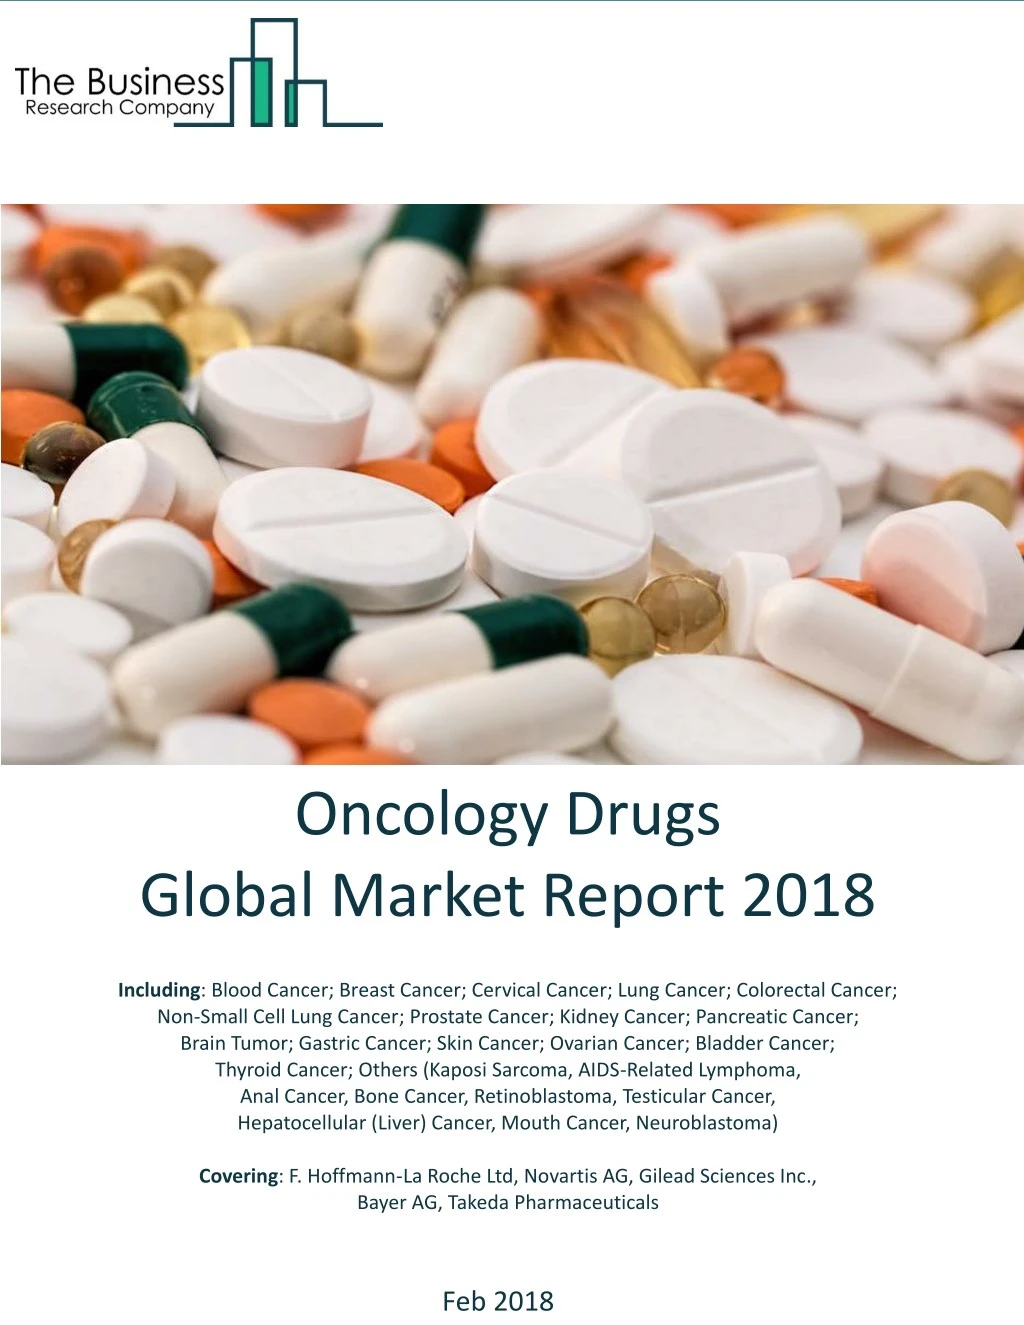 oncology drugs global market report 2018